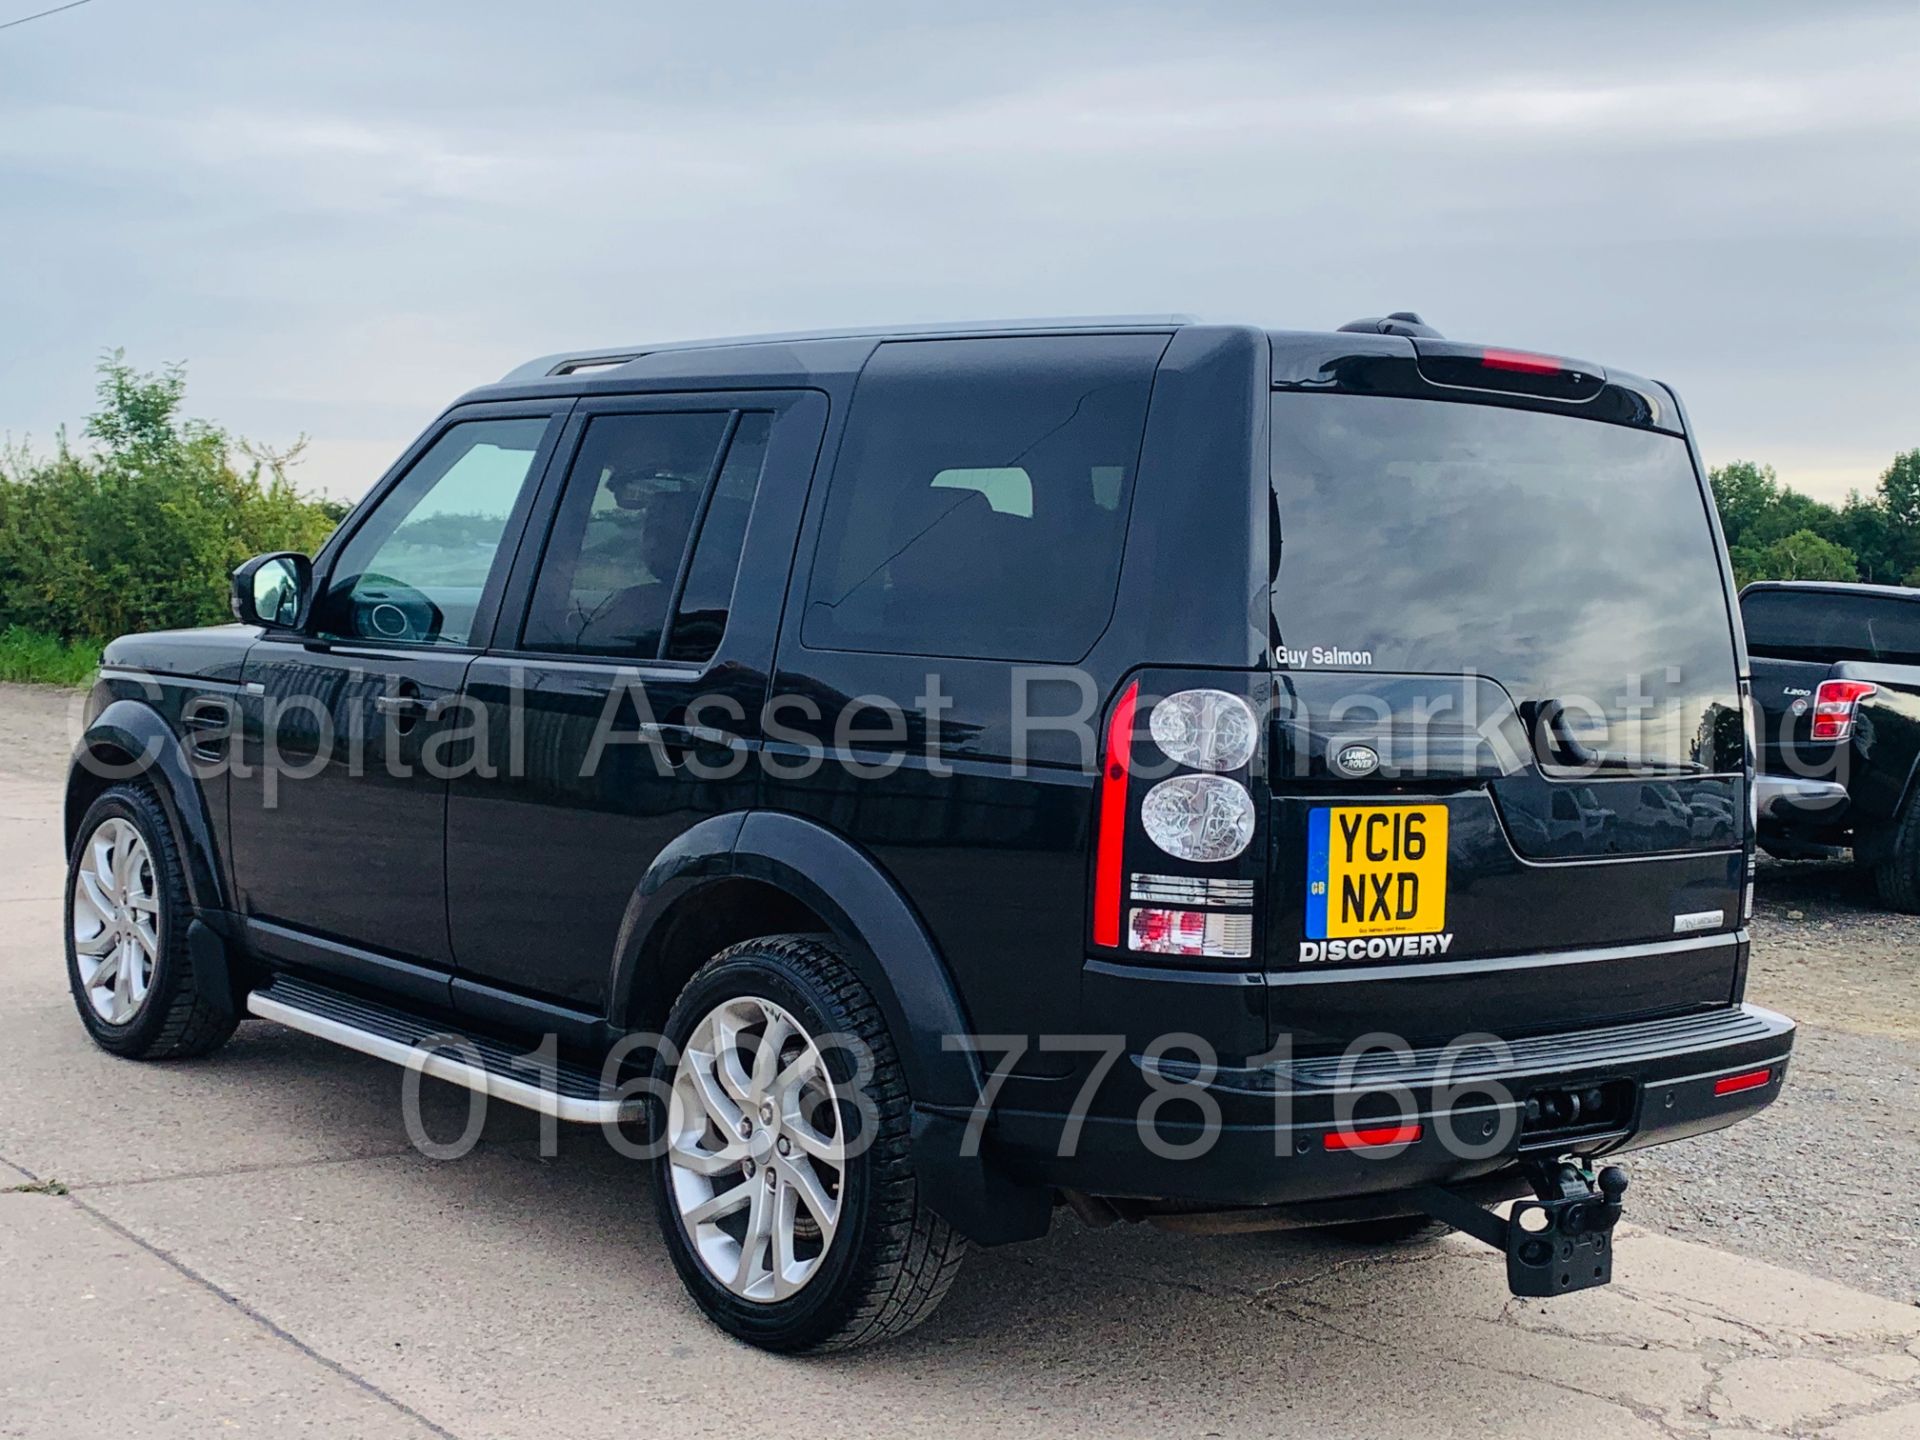 (On Sale) LAND ROVER DISCOVERY 4 *LANDMARK* 7 SEATER SUV (2016) '3.0 SDV6 - 8 SPEED AUTO' (1 OWNER) - Image 10 of 65